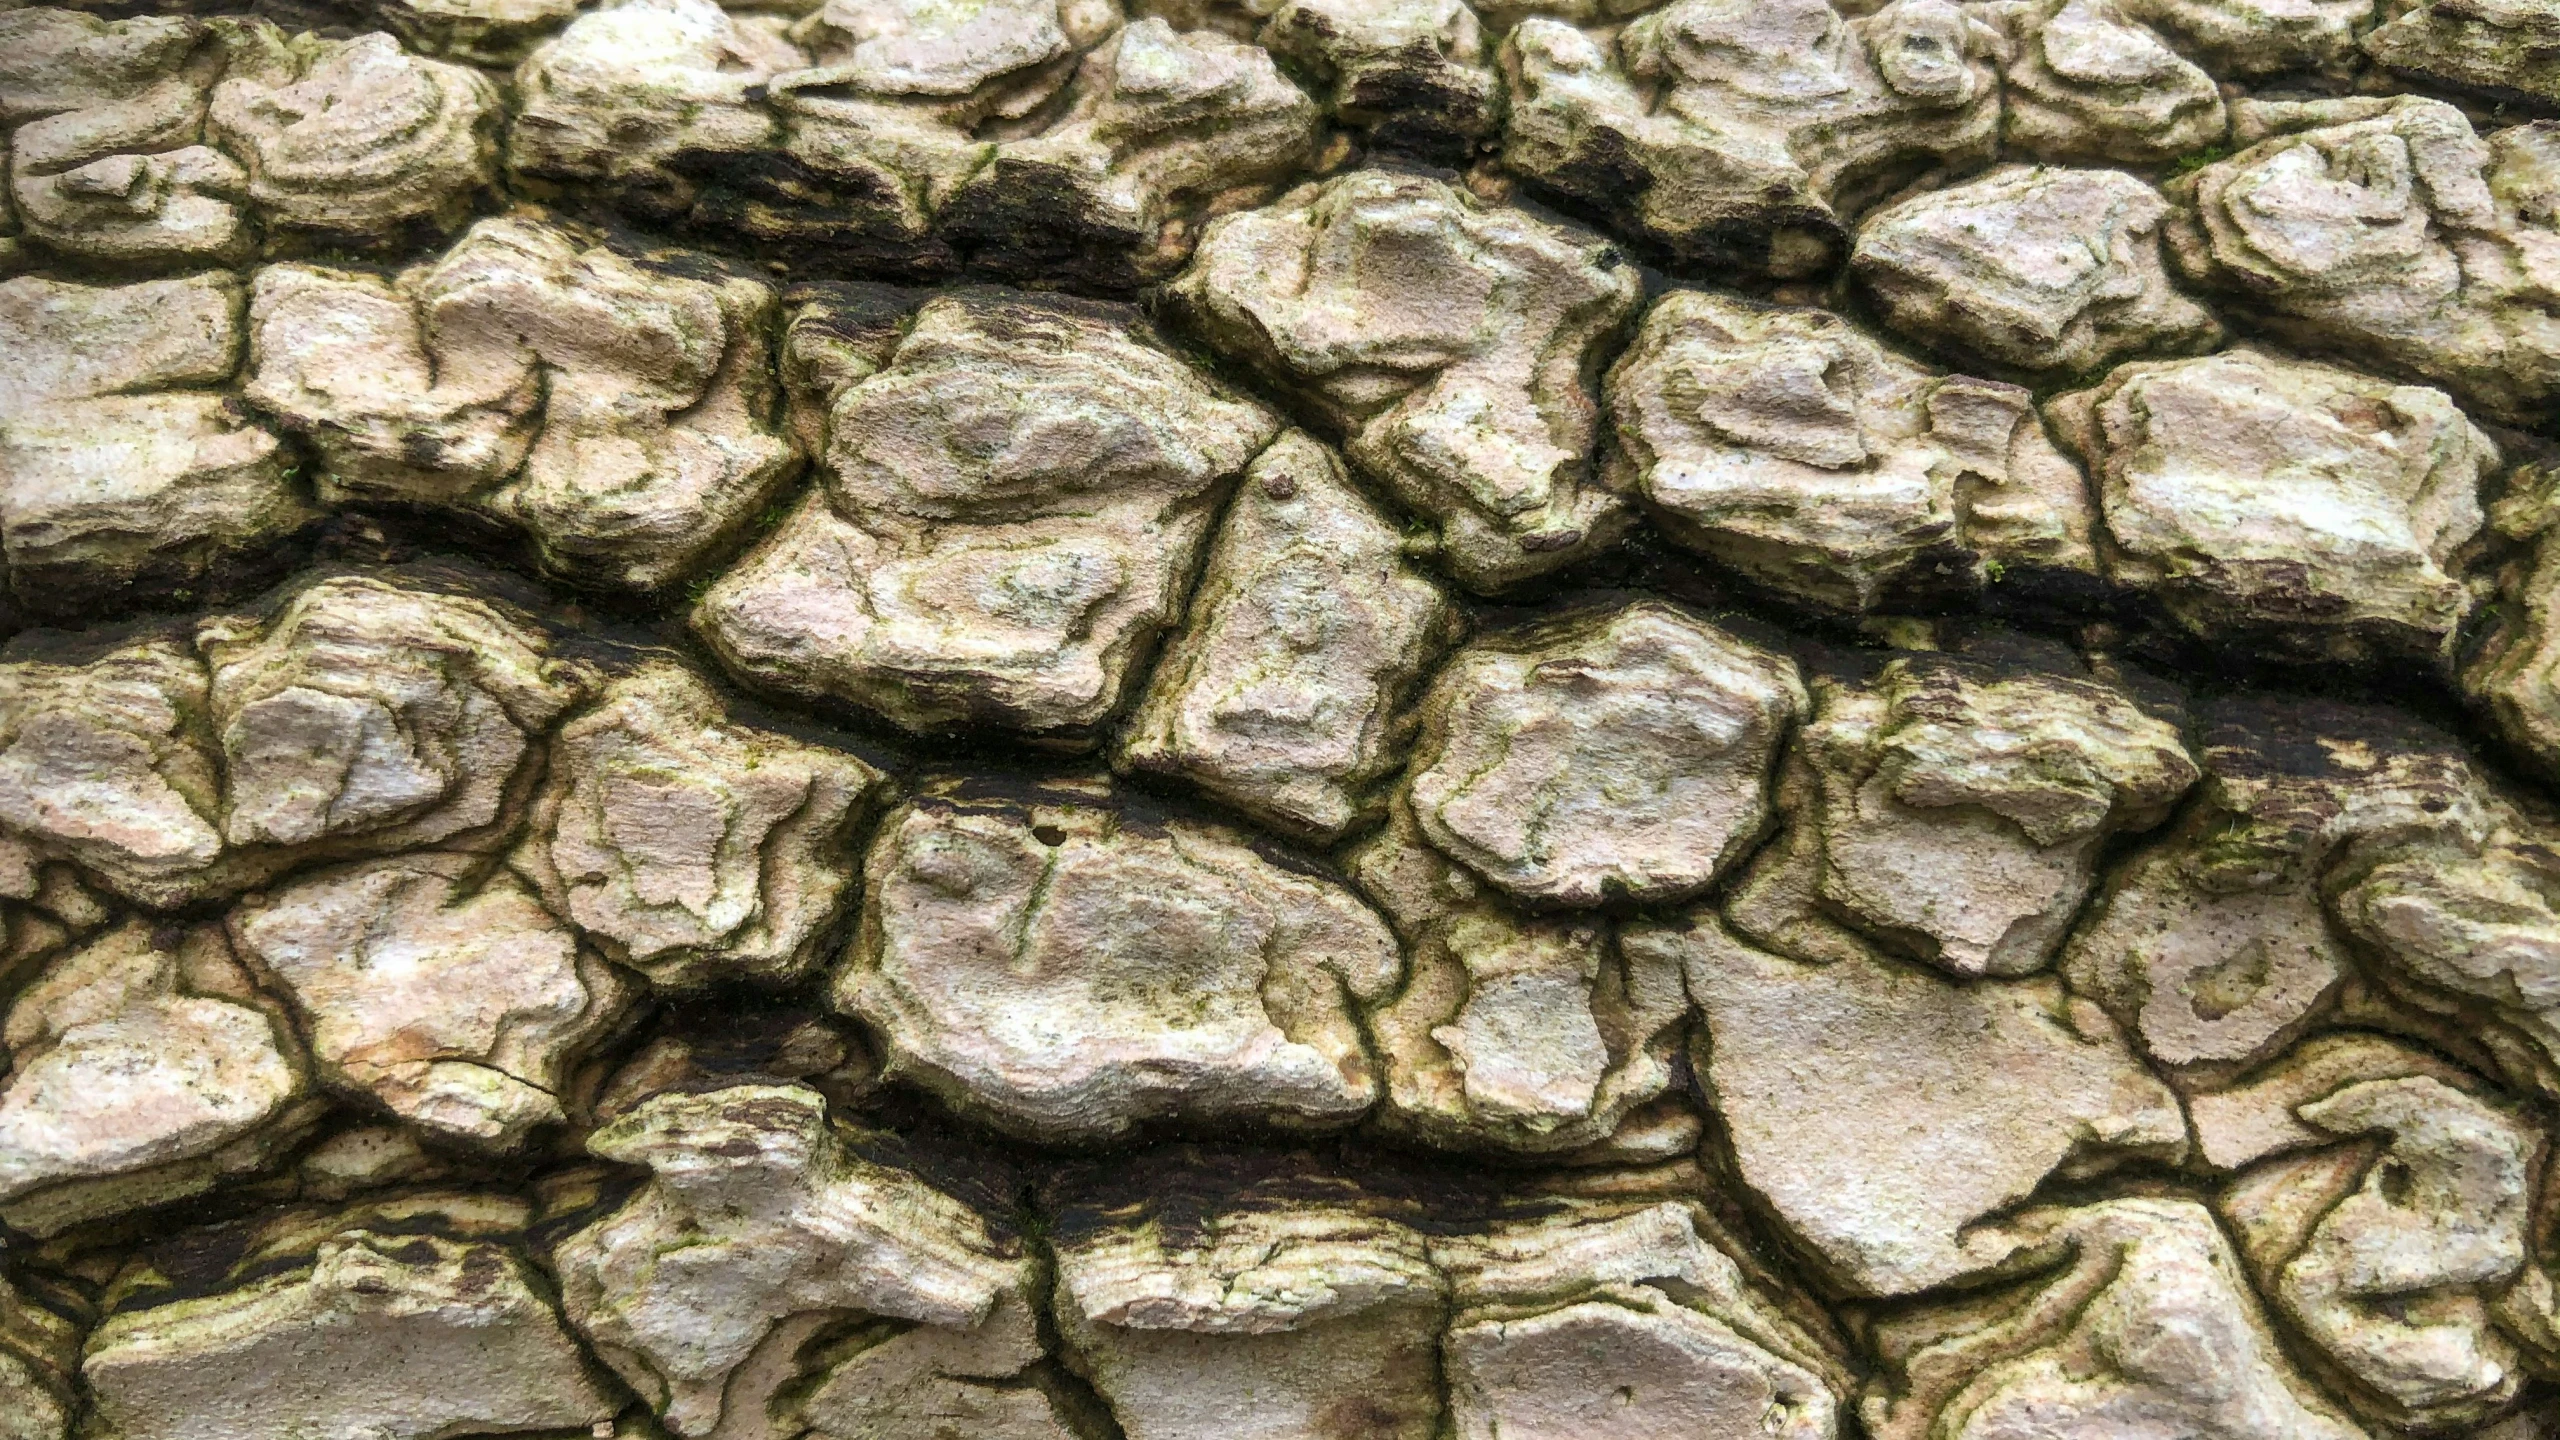 tree bark is shown with lots of rocks